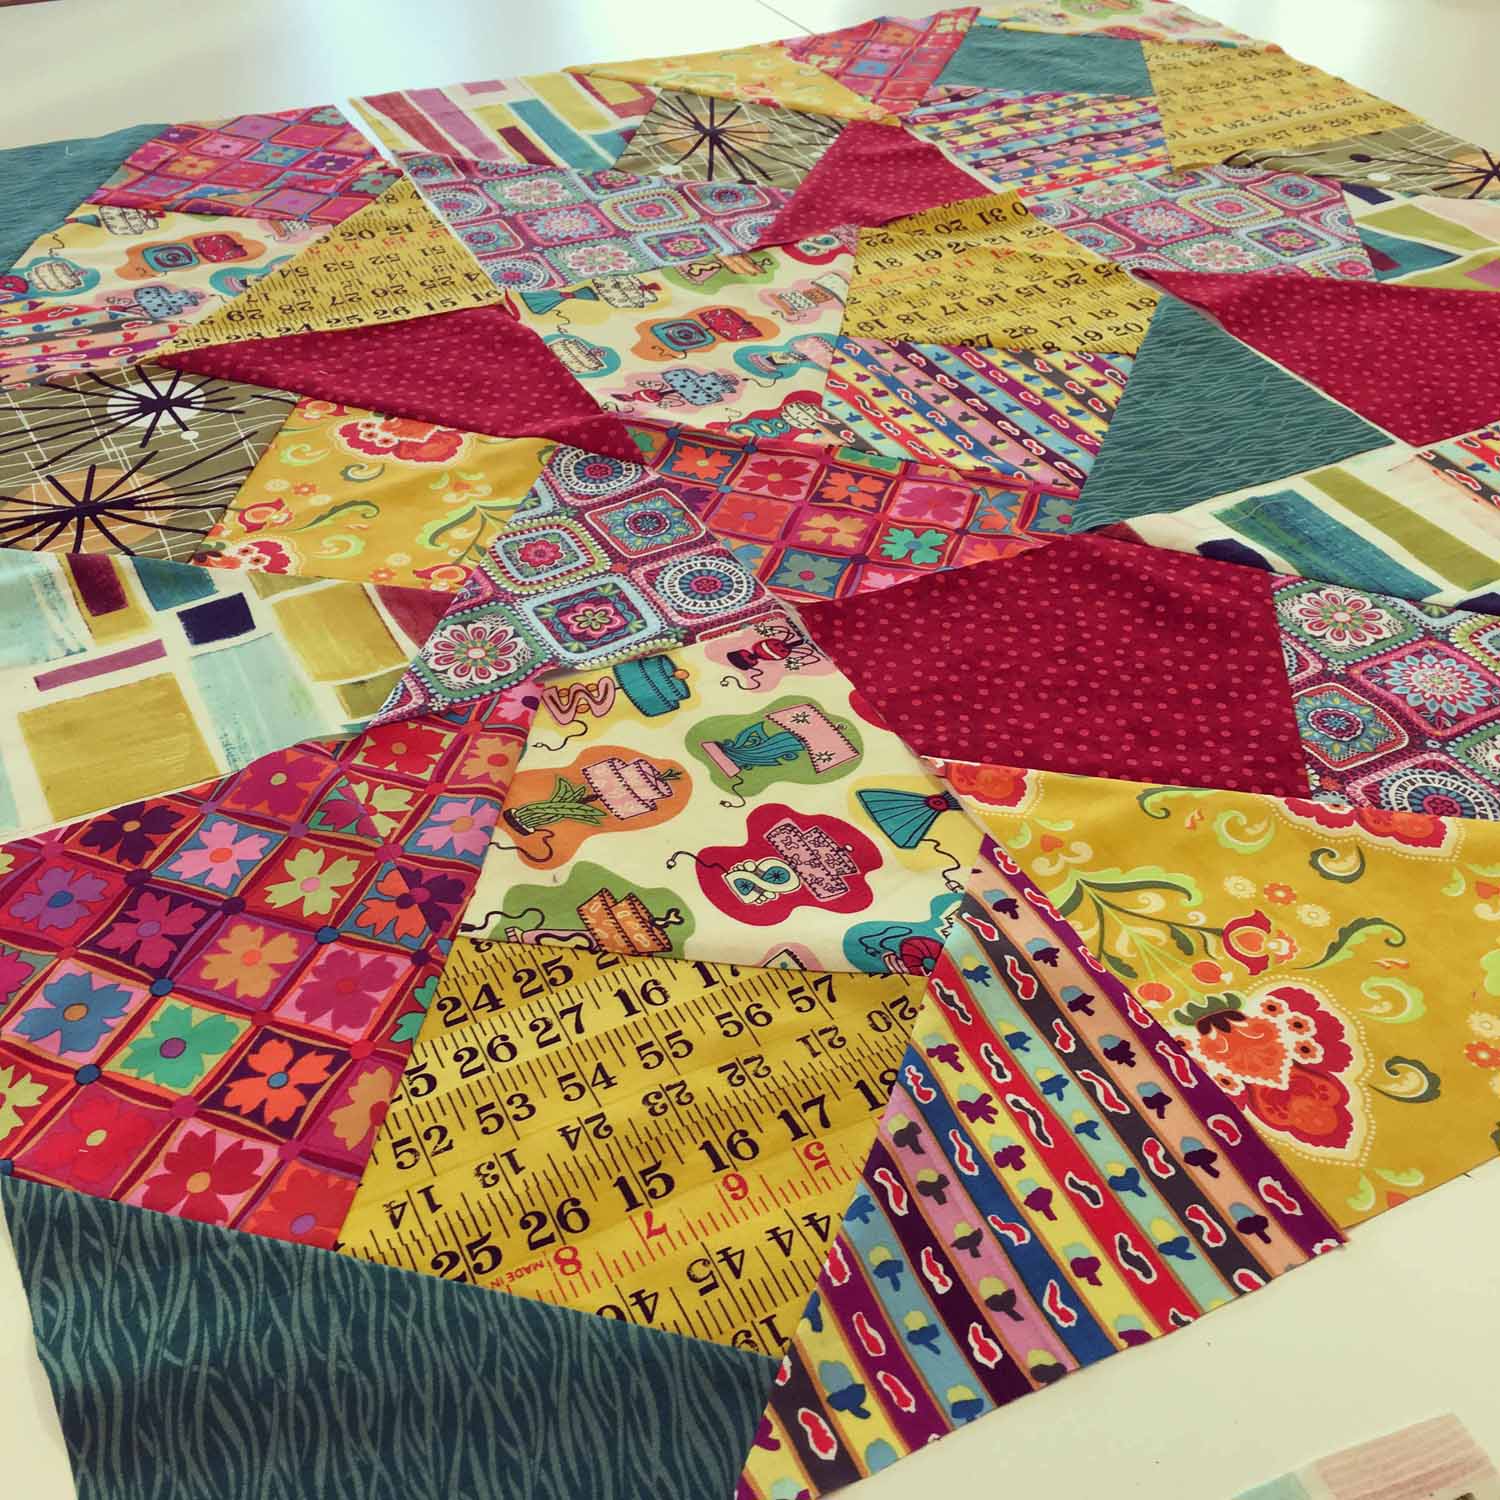 A totally indulgent Patchwork Weekend